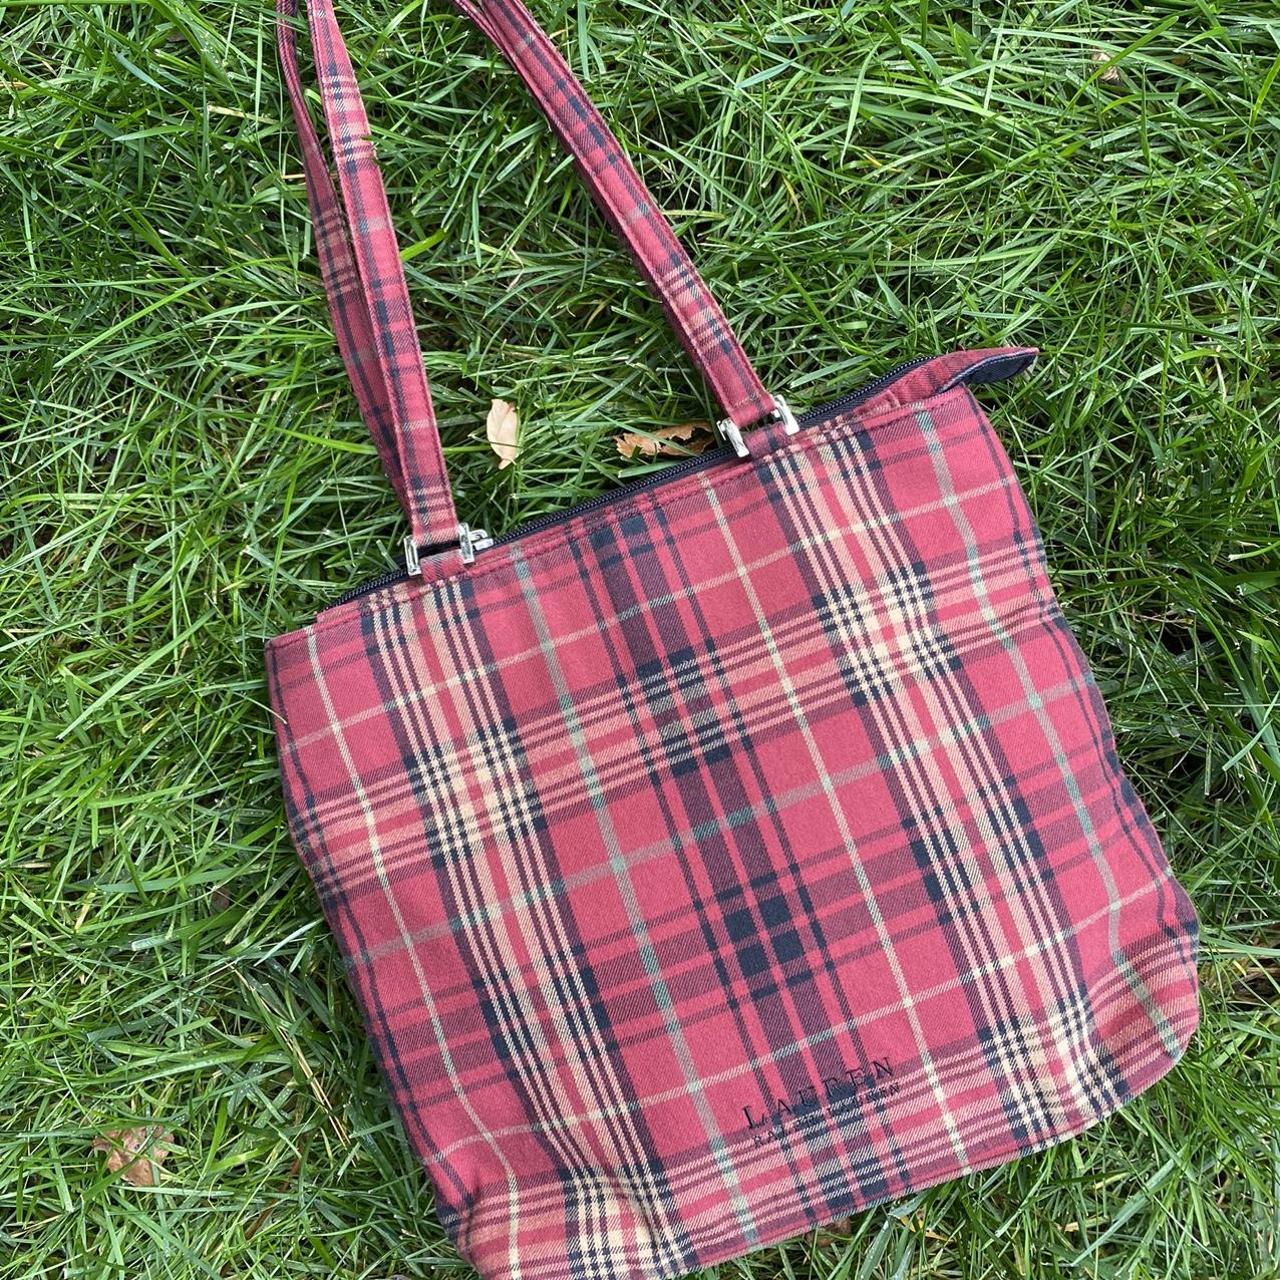 Red Tartan Makeup Bag | Handcrafted in Wales – Emma Easter Handcrafted